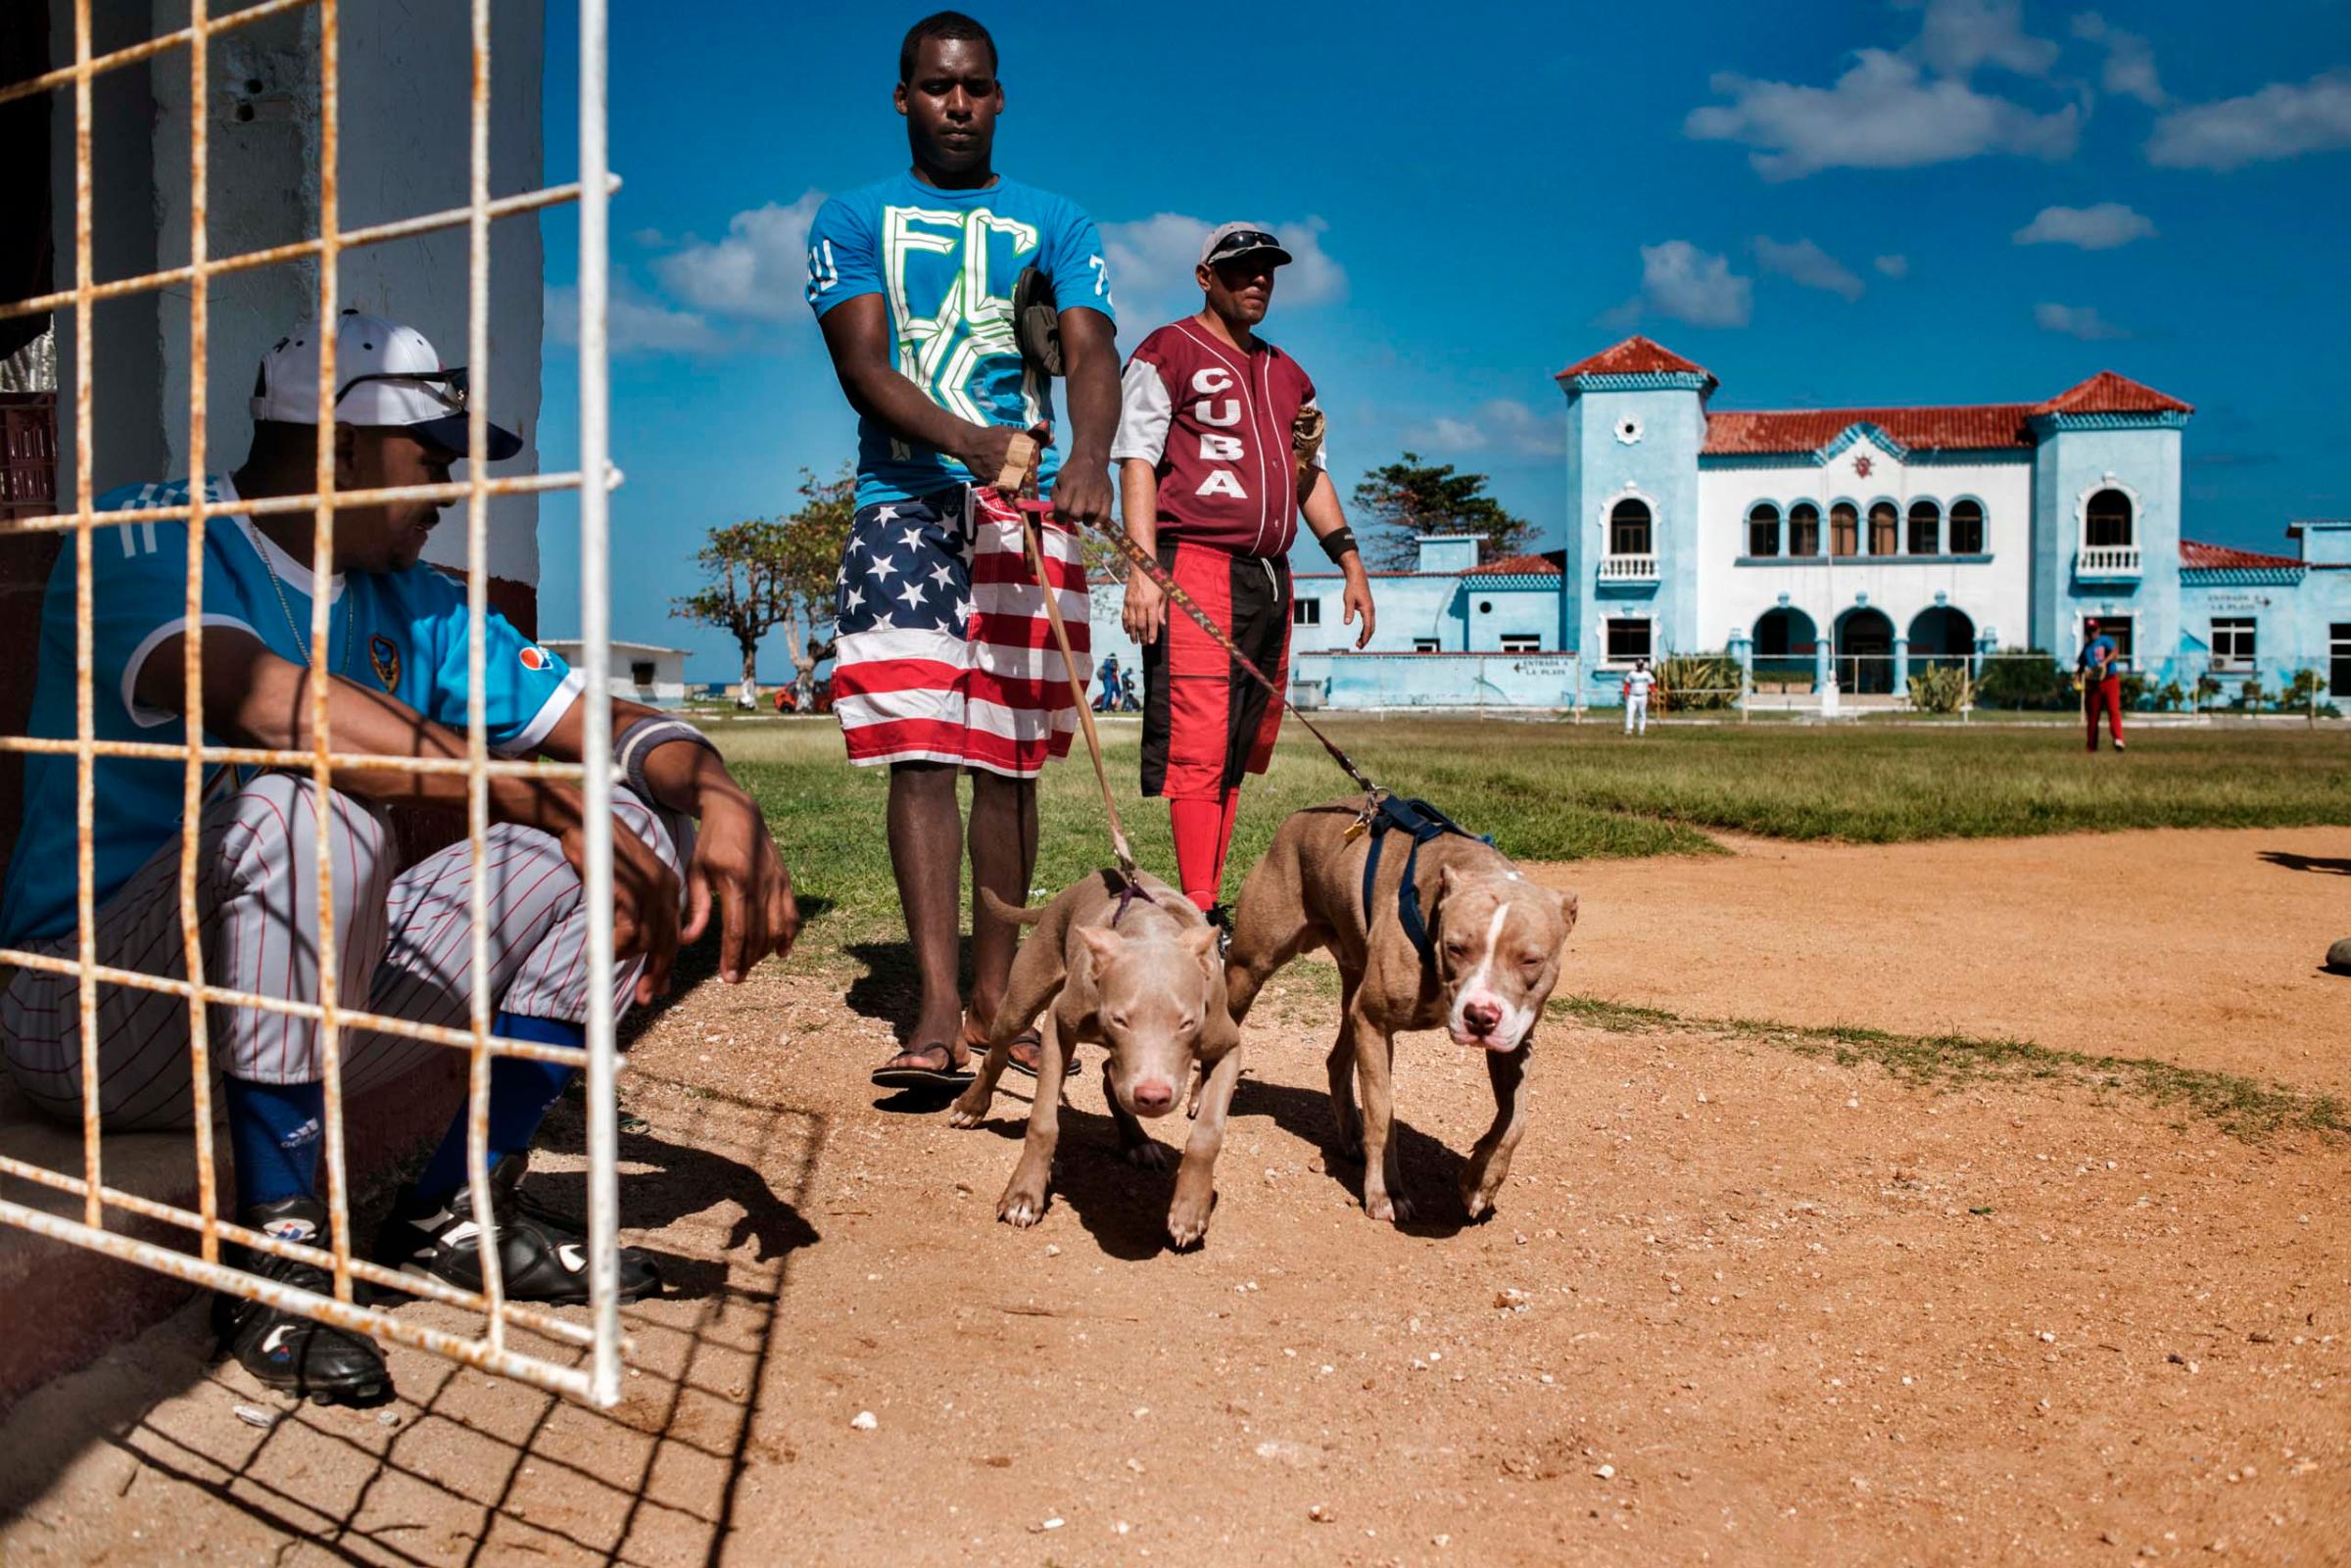 January, 2015. A young Cuban, wearing shorts decorated with the American flag, walks his dogs past a softball field in the Jaimanitas neighborhood of Havana.